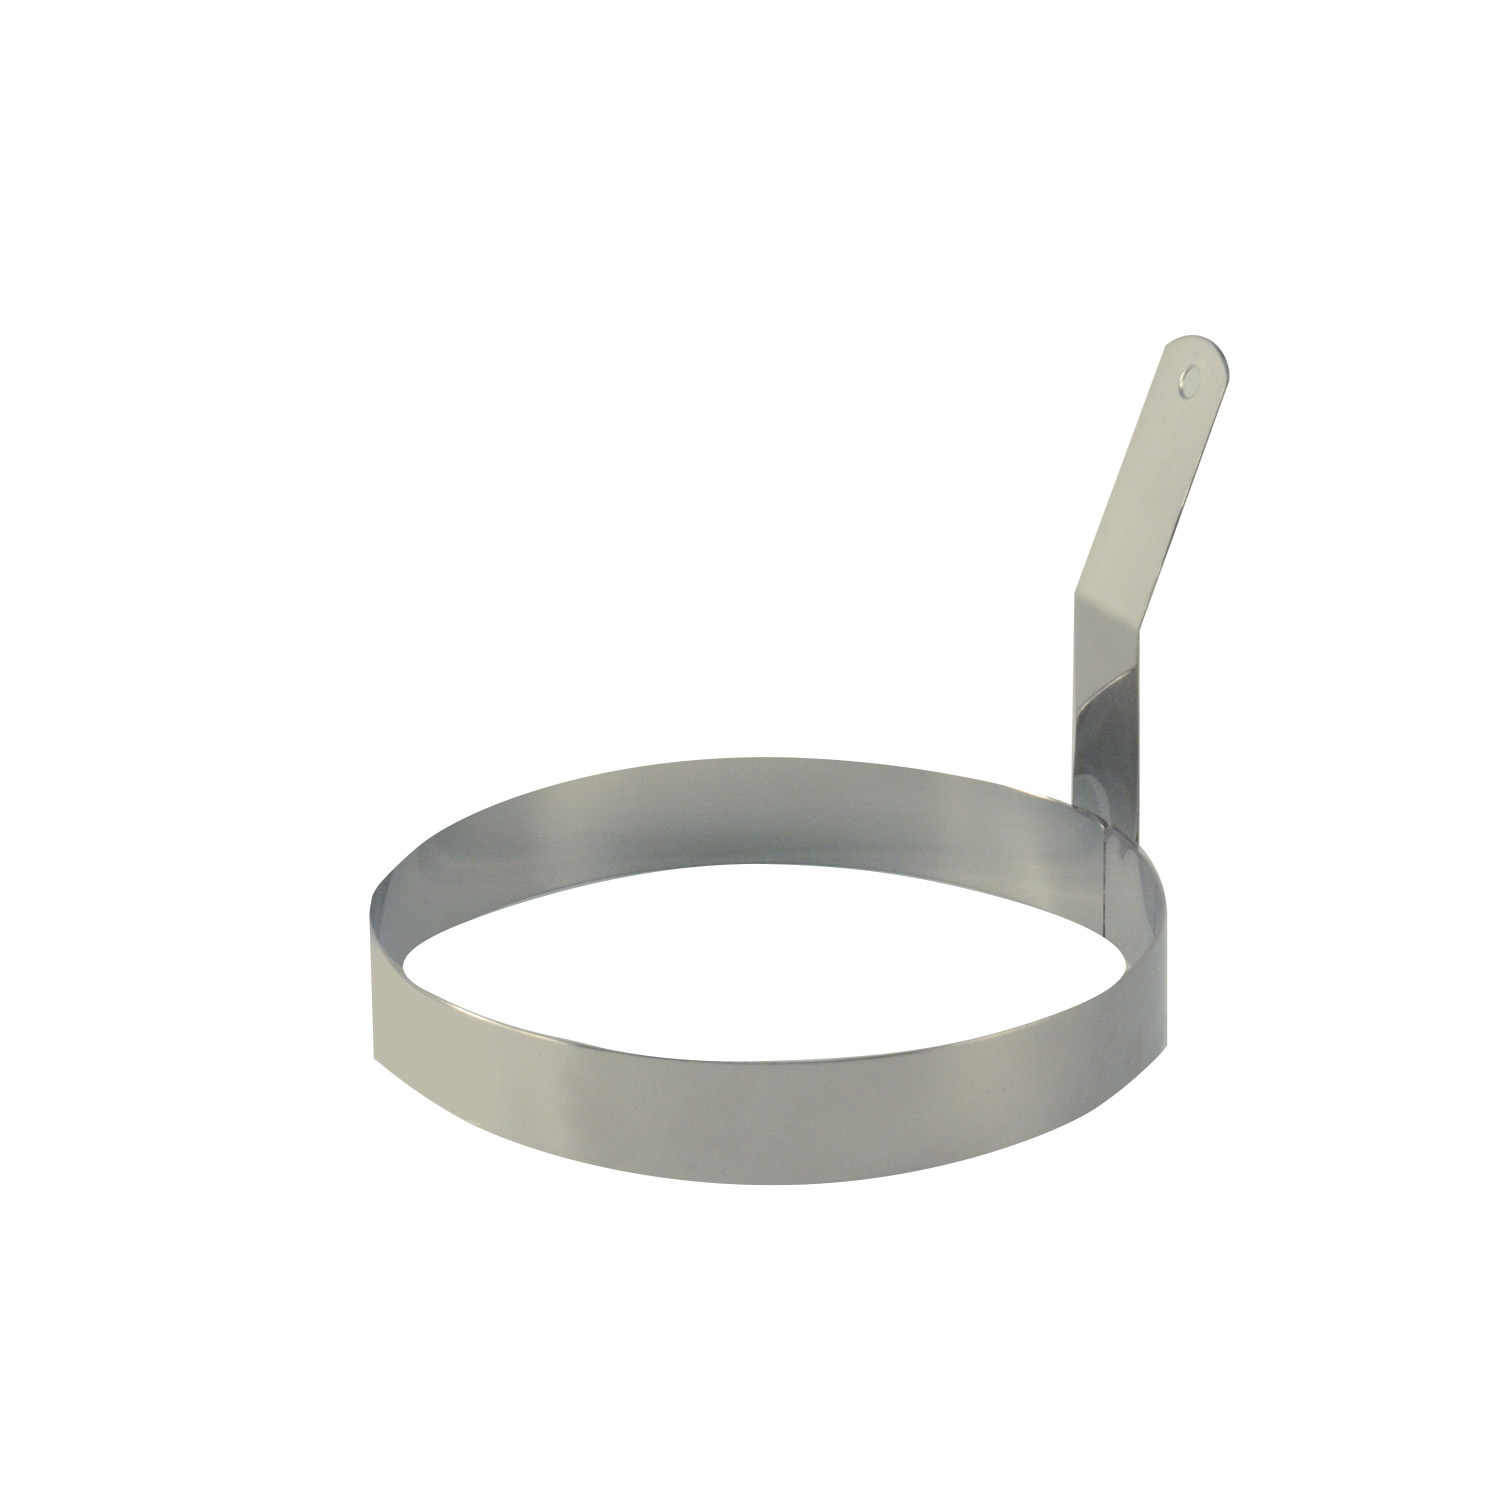 CAC China SEGR-6 Stainless Steel Egg Ring 6" Dia